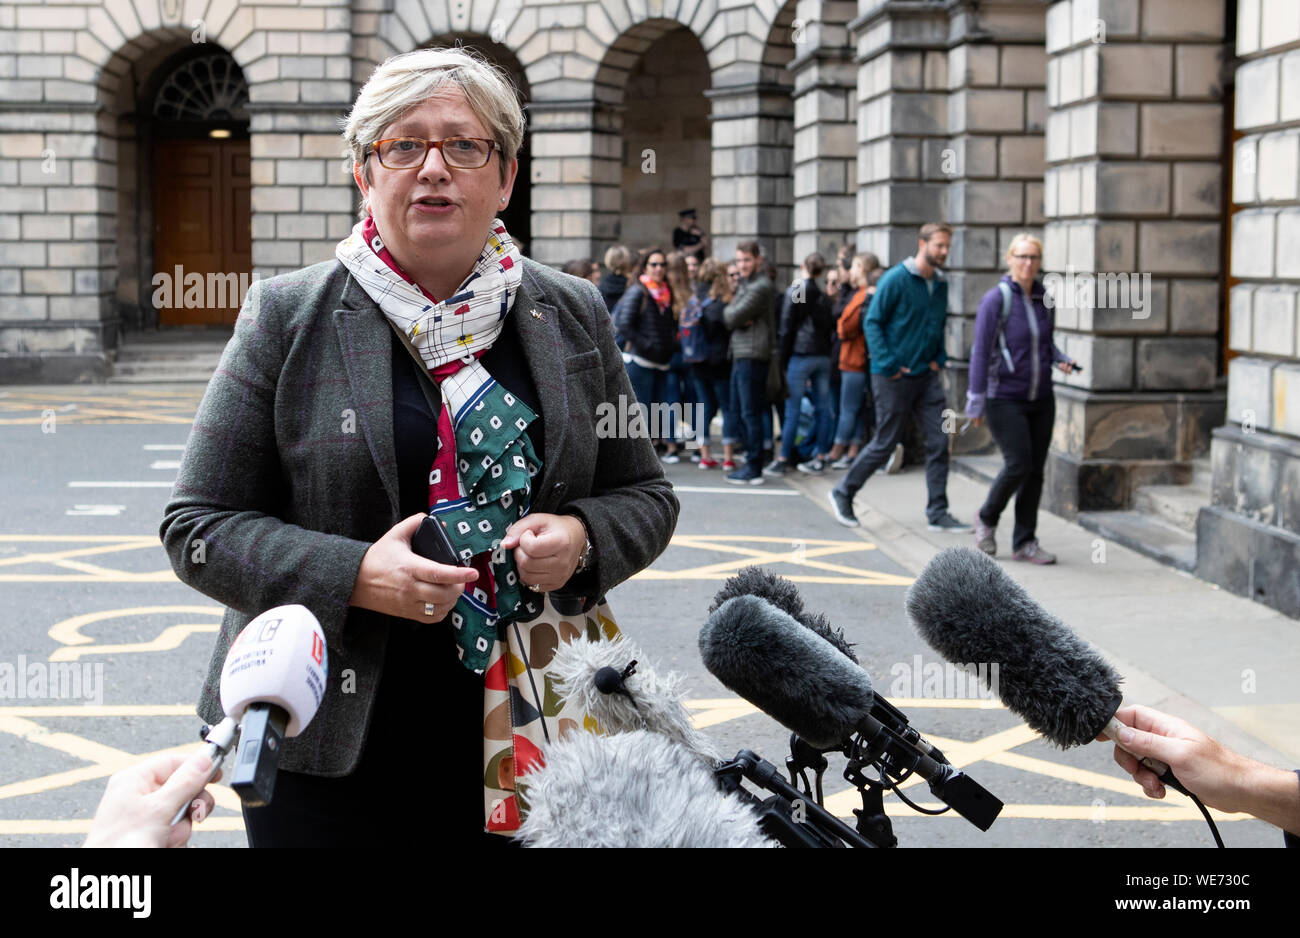 SNP MP Joanna Cherry outside the Court of Session in Edinburgh where parliamentarians were seeking an interim interdict through the Scottish legal system that would prevent the UK Parliament being suspended. Their request was declined by Lord Doherty who said he was not satisfied there was a 'cogent need' for an interdict. Stock Photo